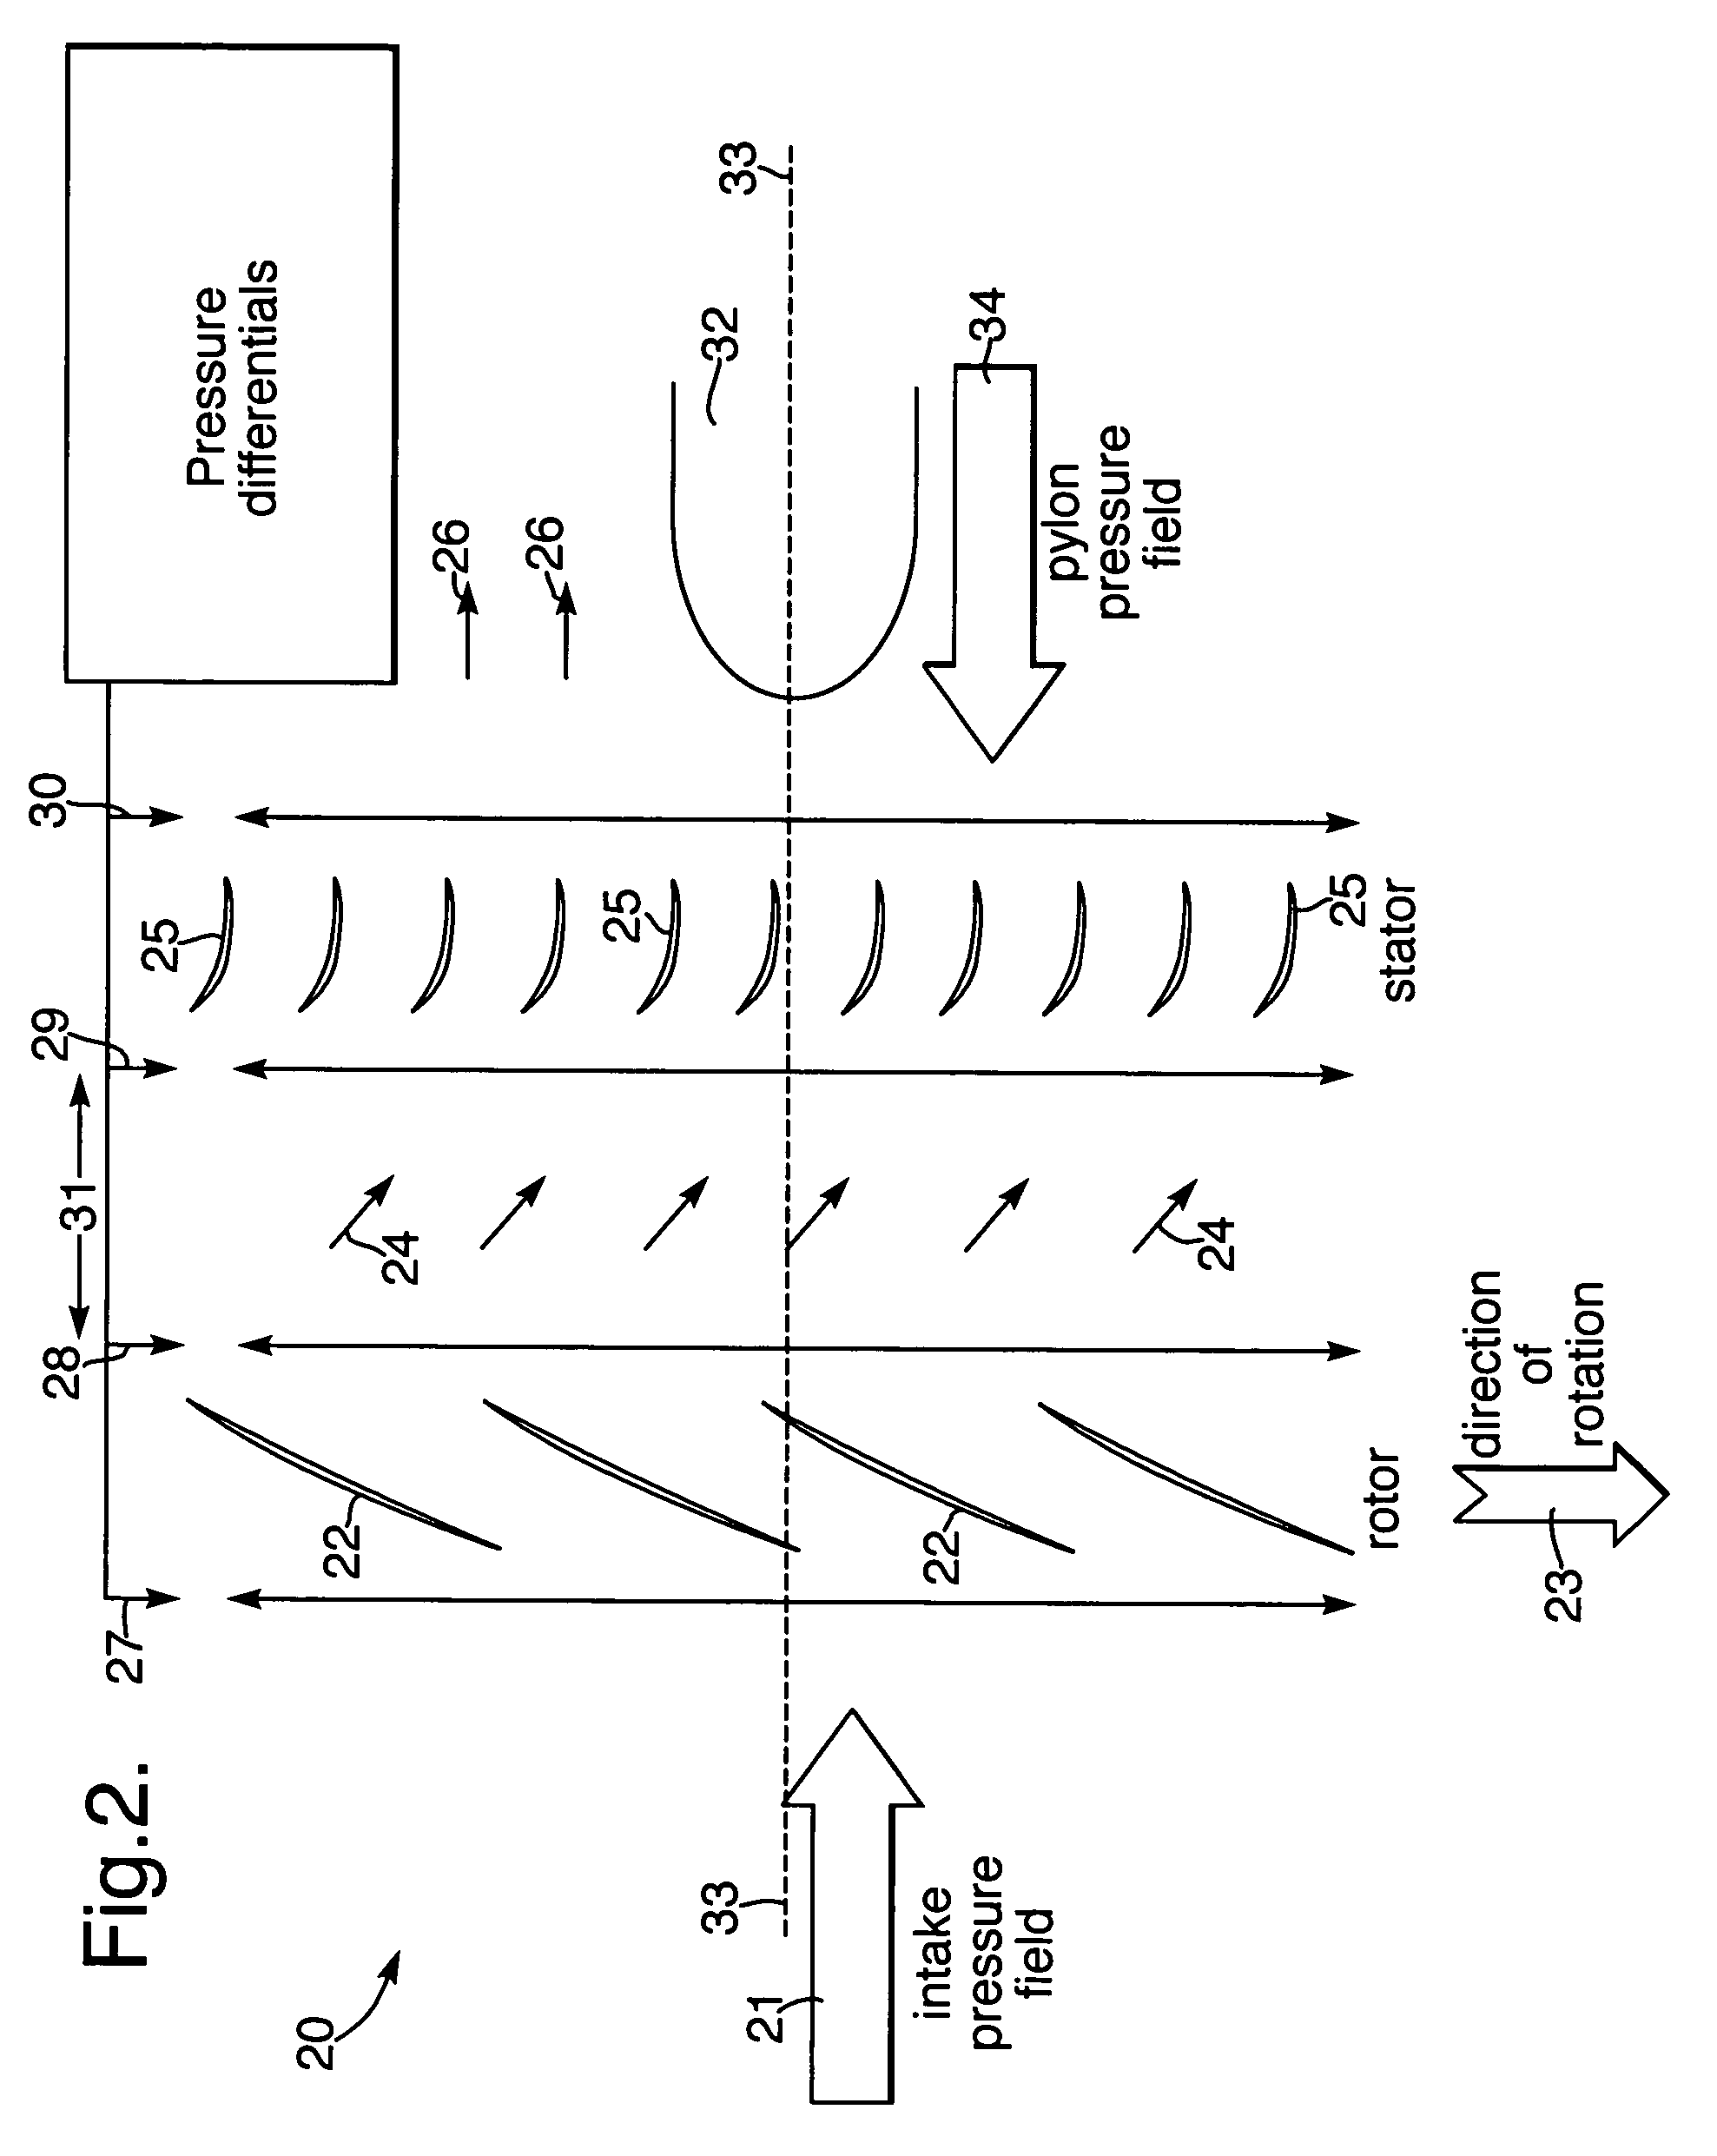 Gas turbine engine including stator vanes having variable camber and stagger configurations at different circumferential positions